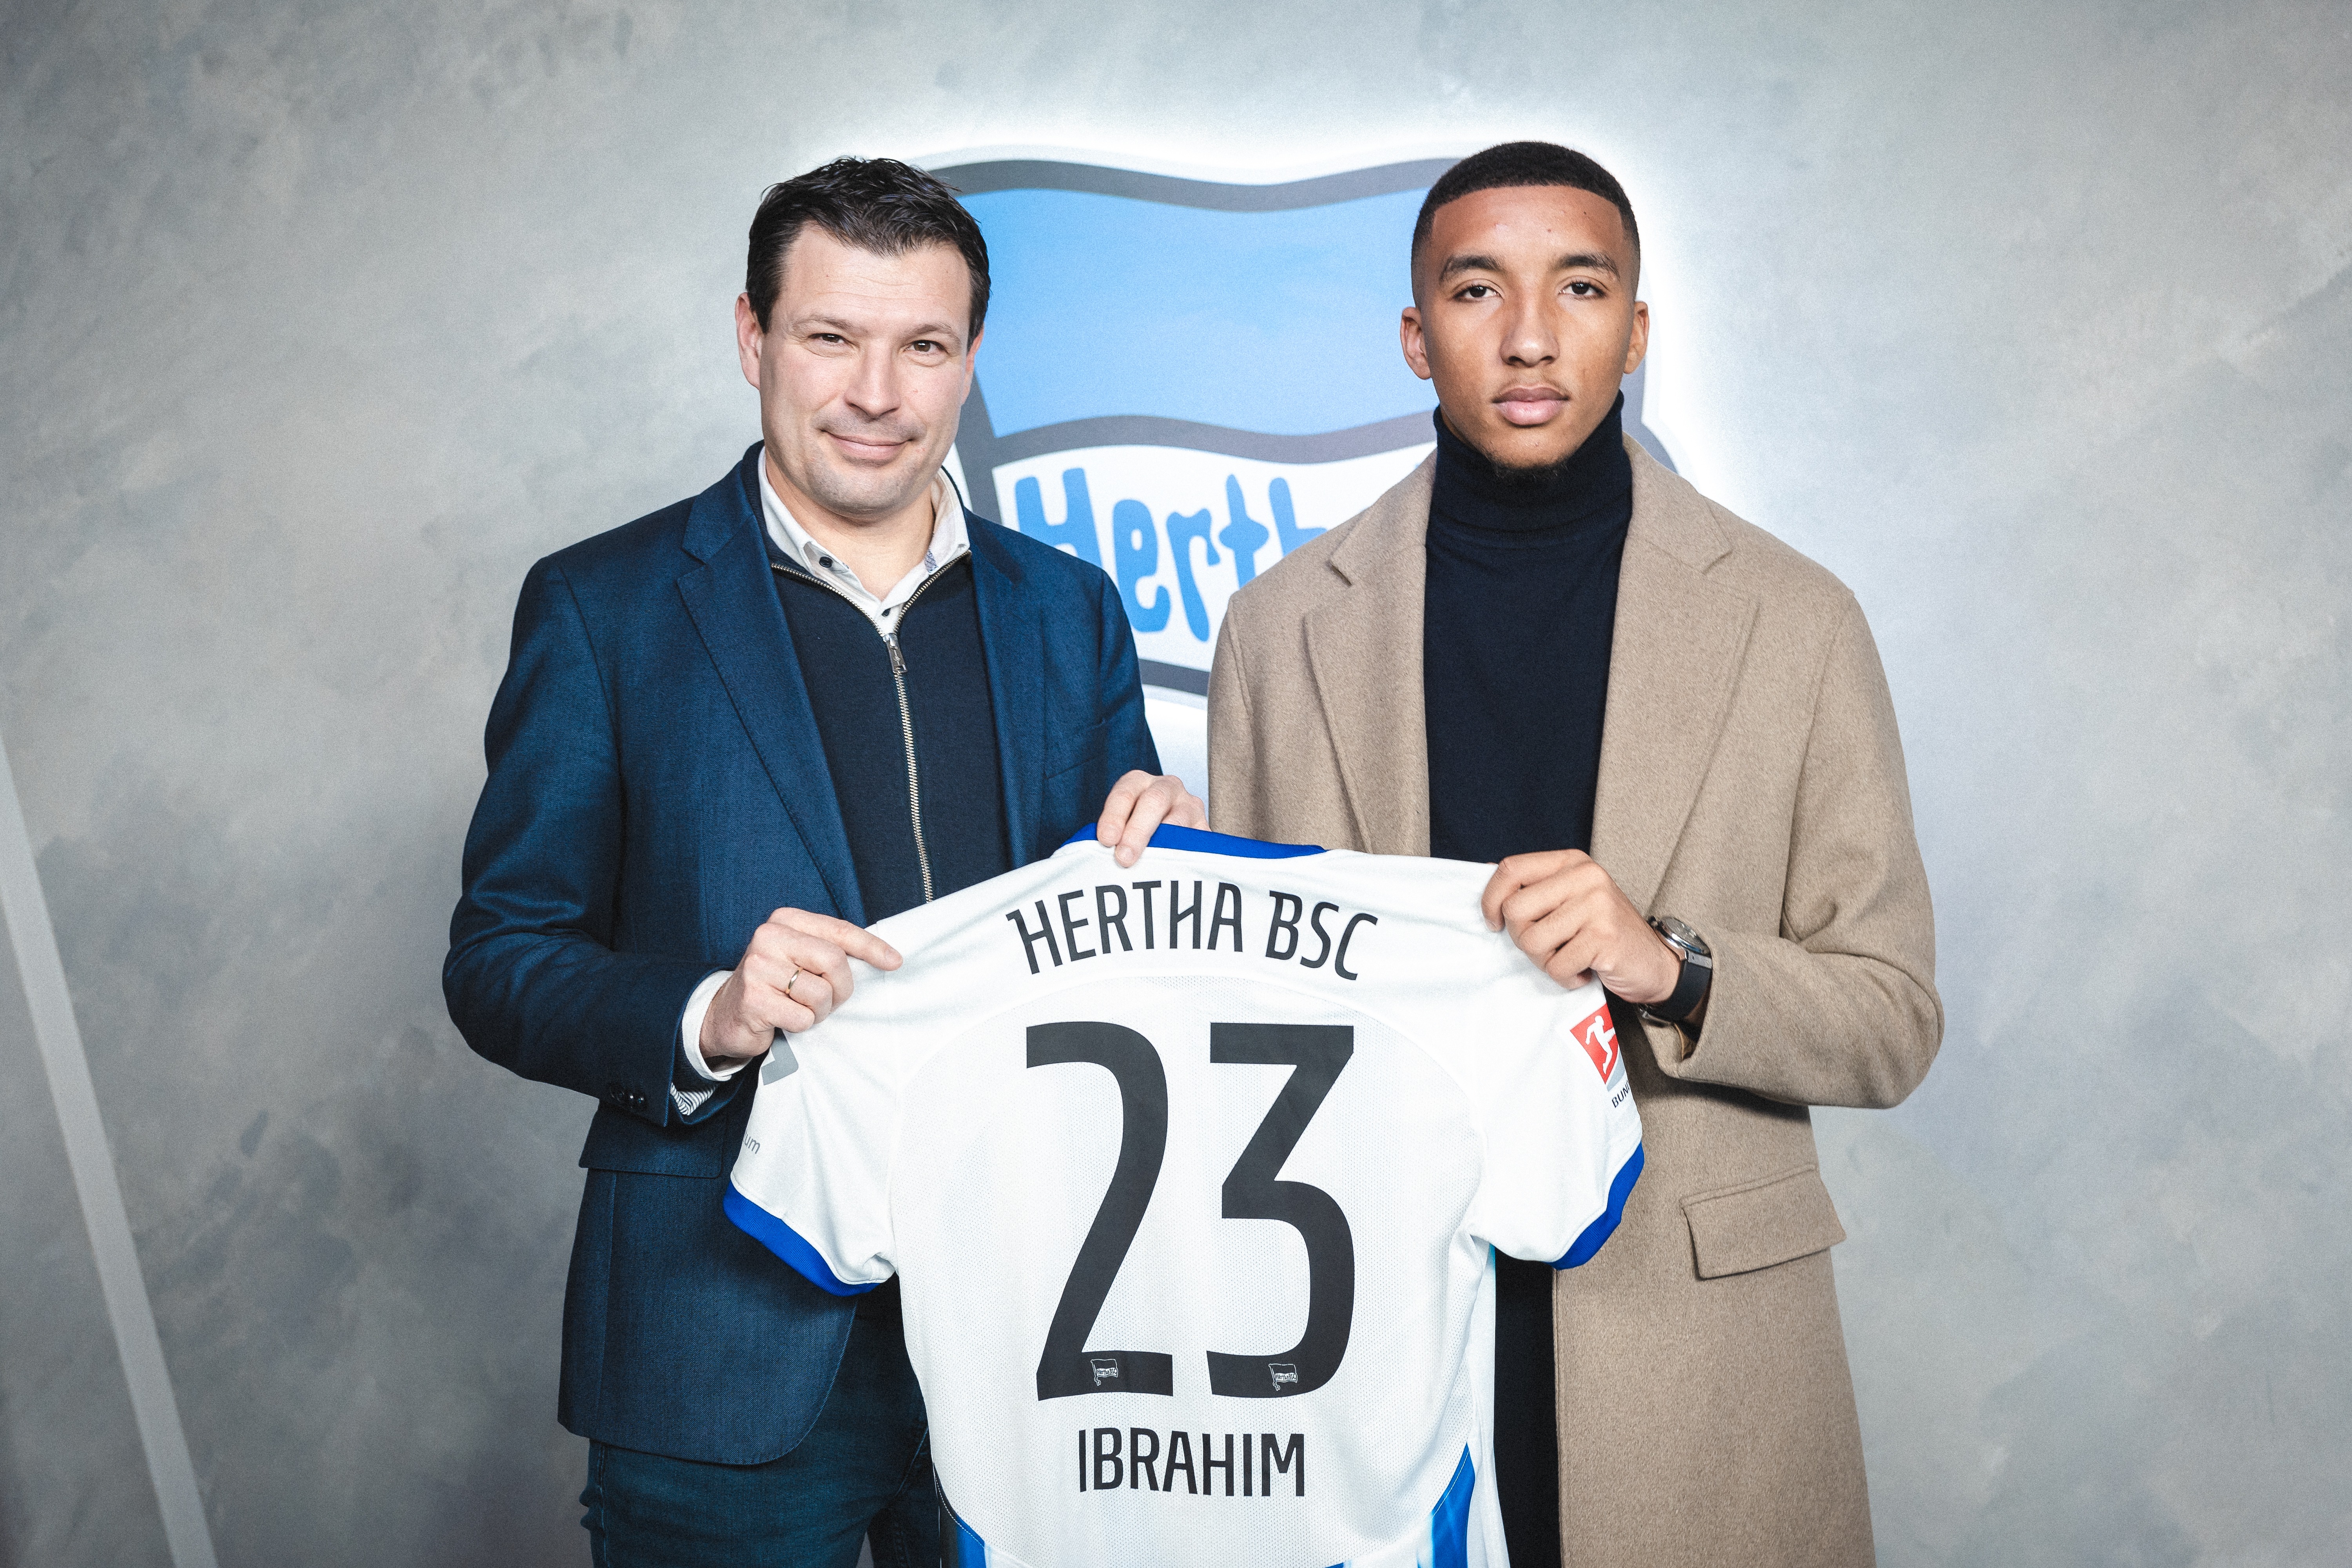 Bradley Ibrahim and Benjamin Weber holding a blue and white shirt with the number 23.